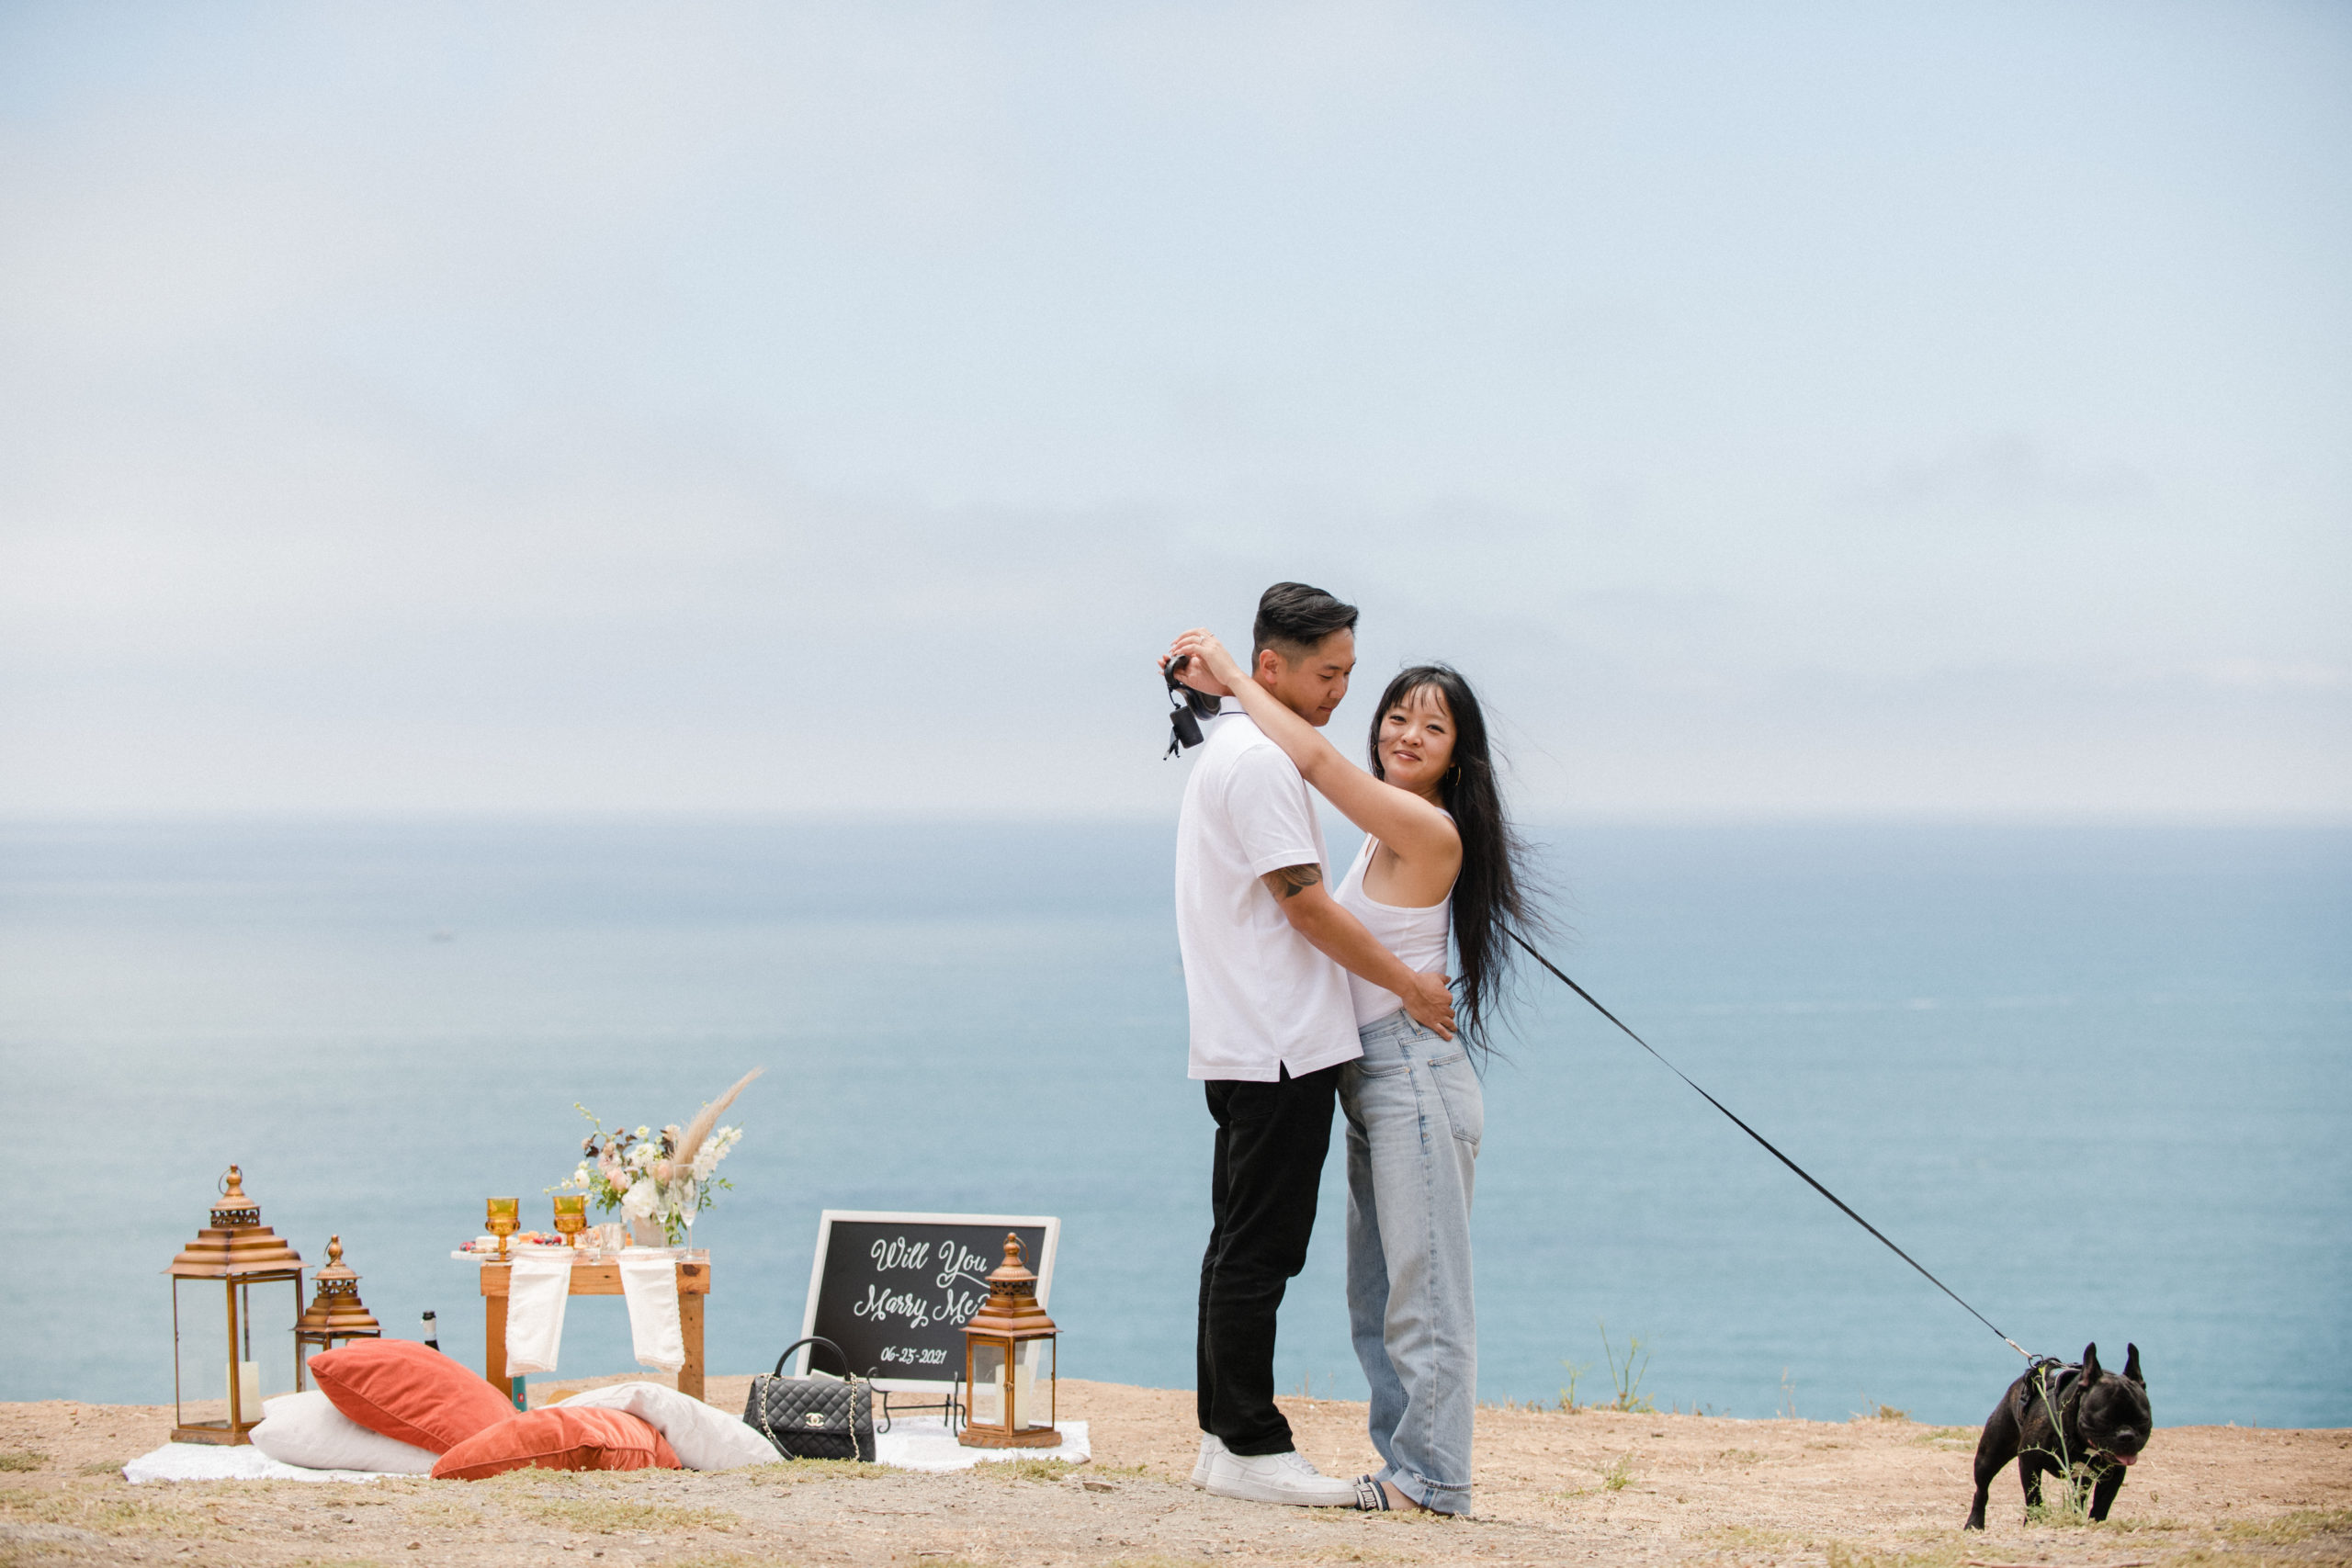 Pacific Palisades Ocean View Proposal by Karina Pires Photography